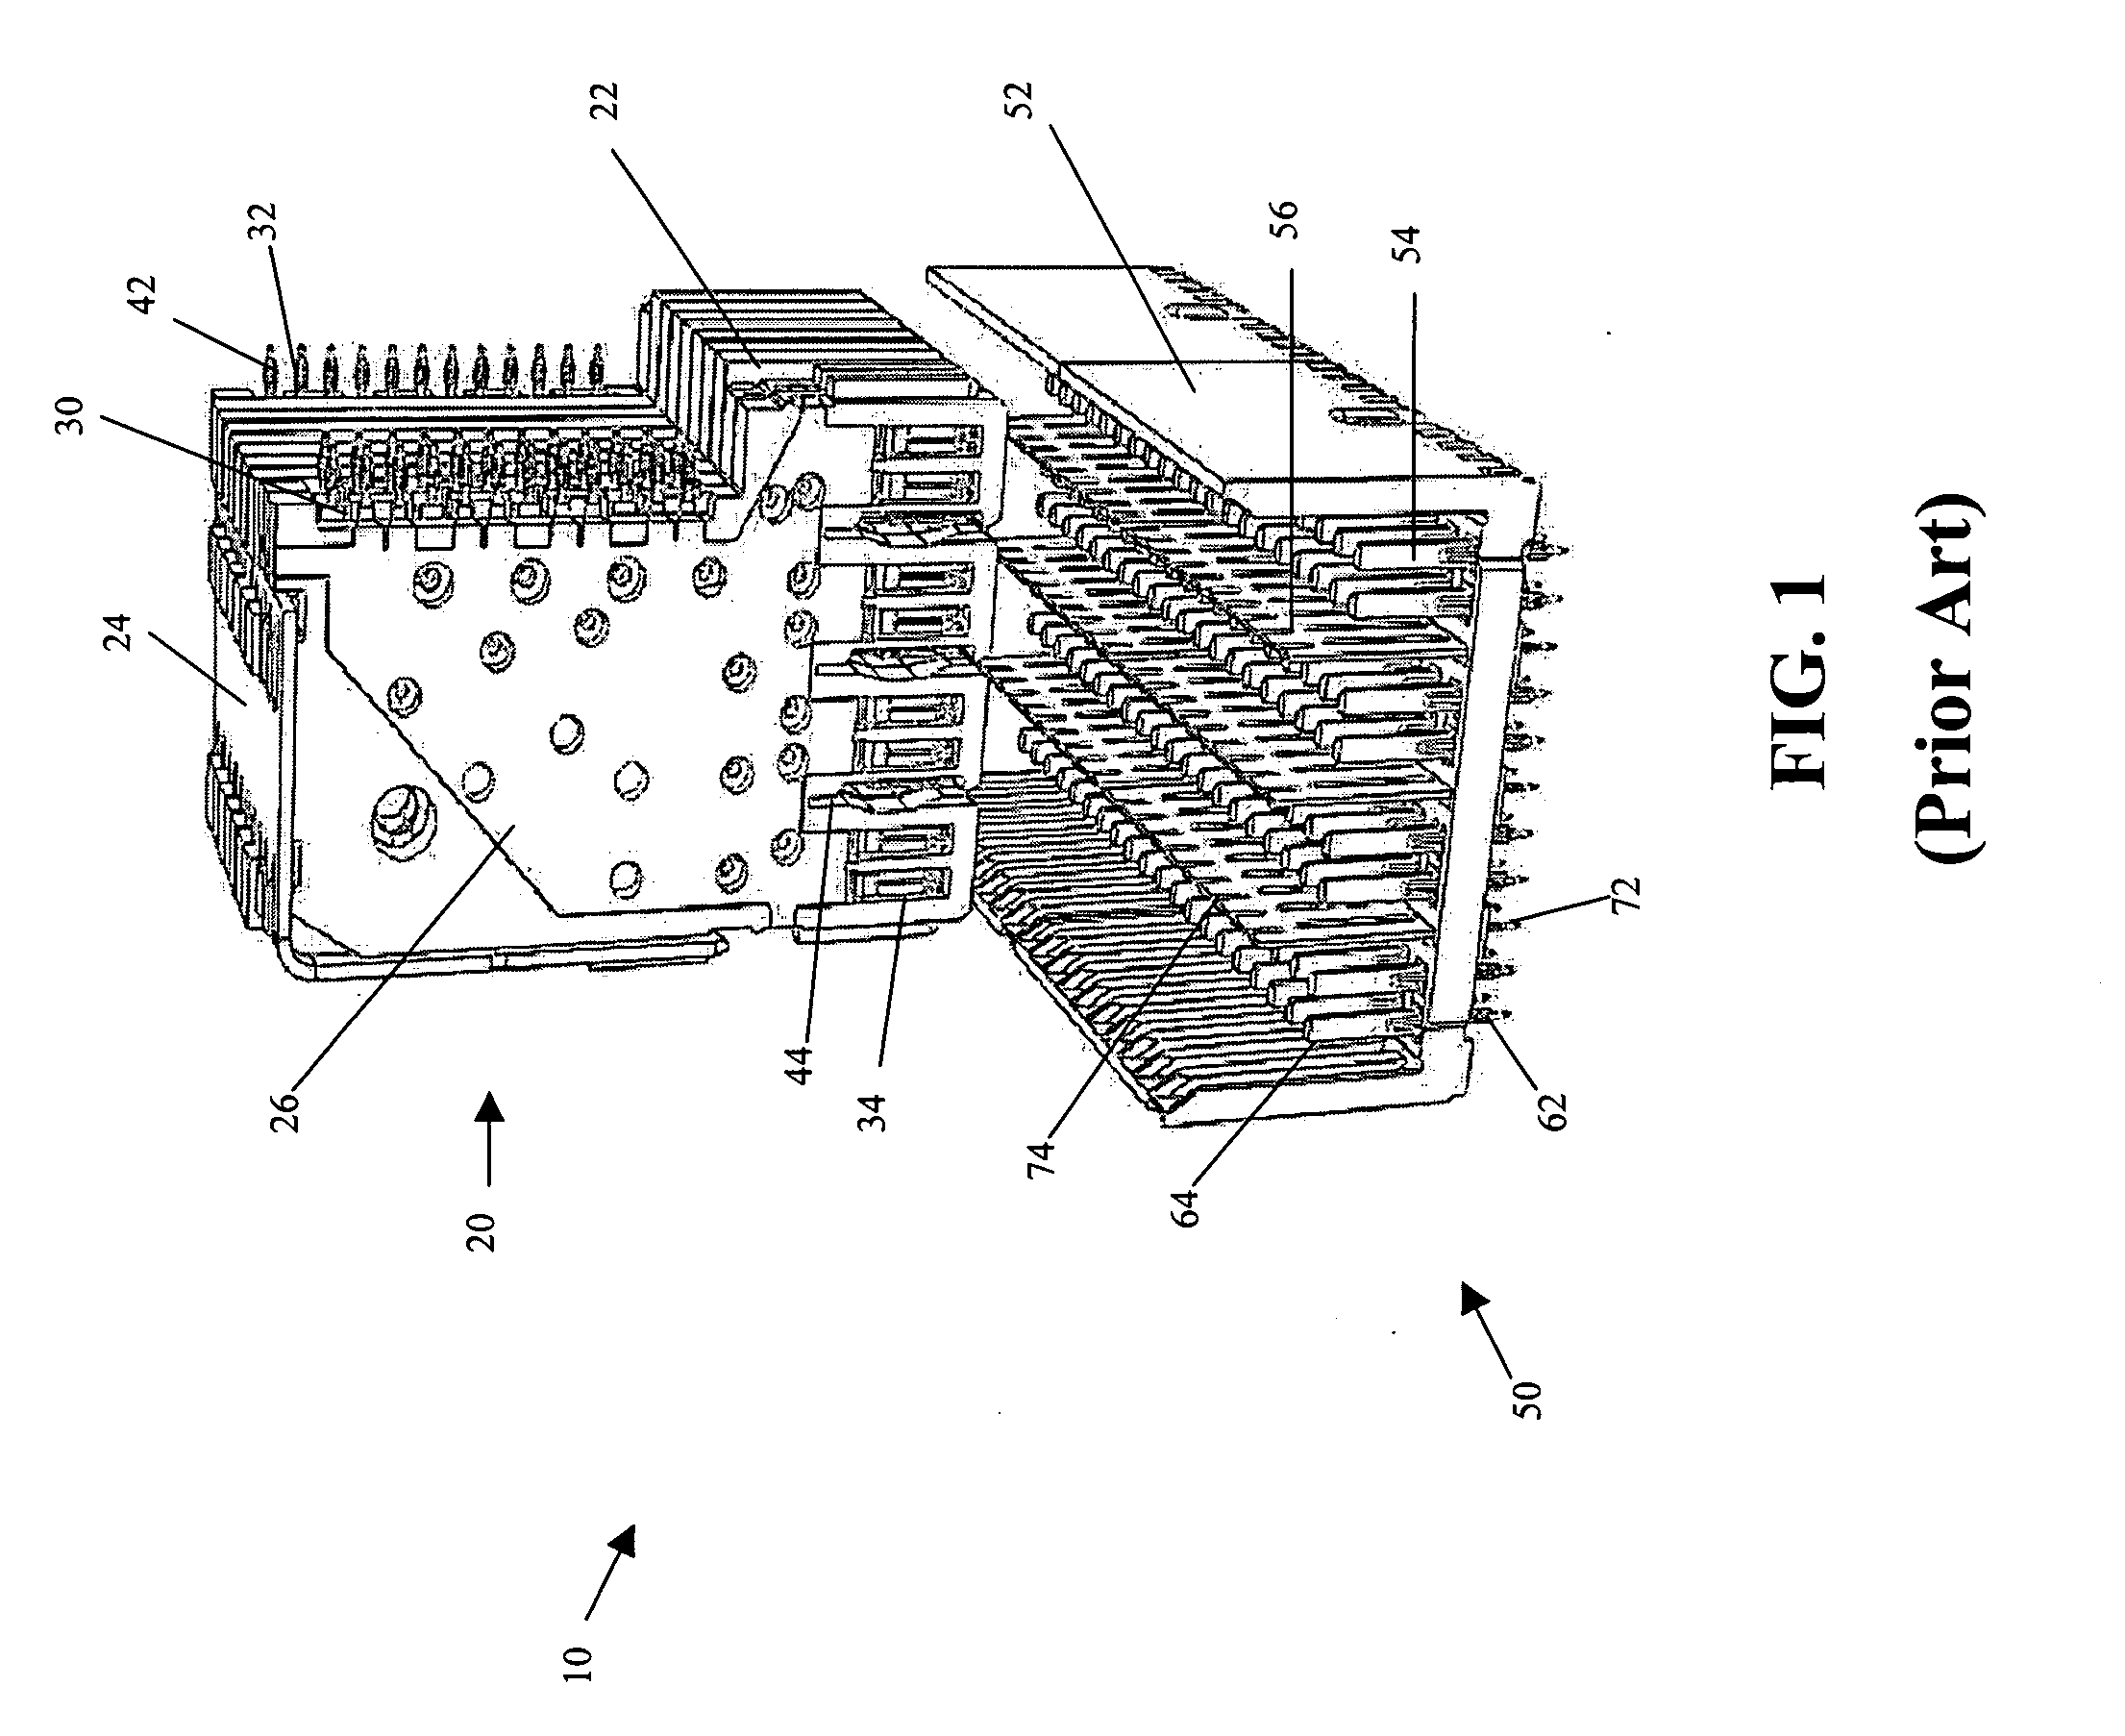 Electrical connector incorporating passive circuit elements